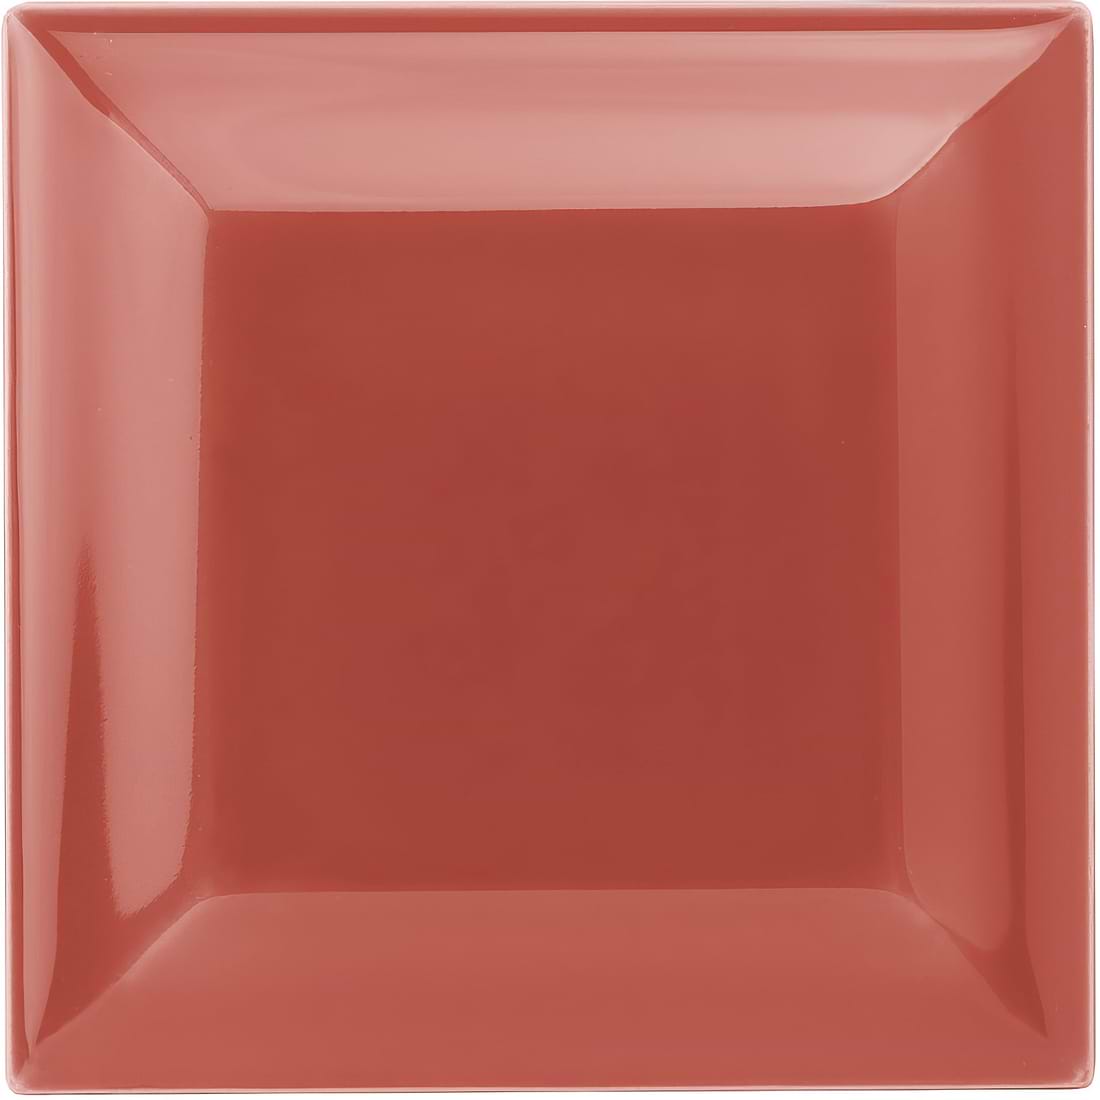 Duchy Pink Metro Bevelled Tile 75 x 75mm - Hyperion Tiles